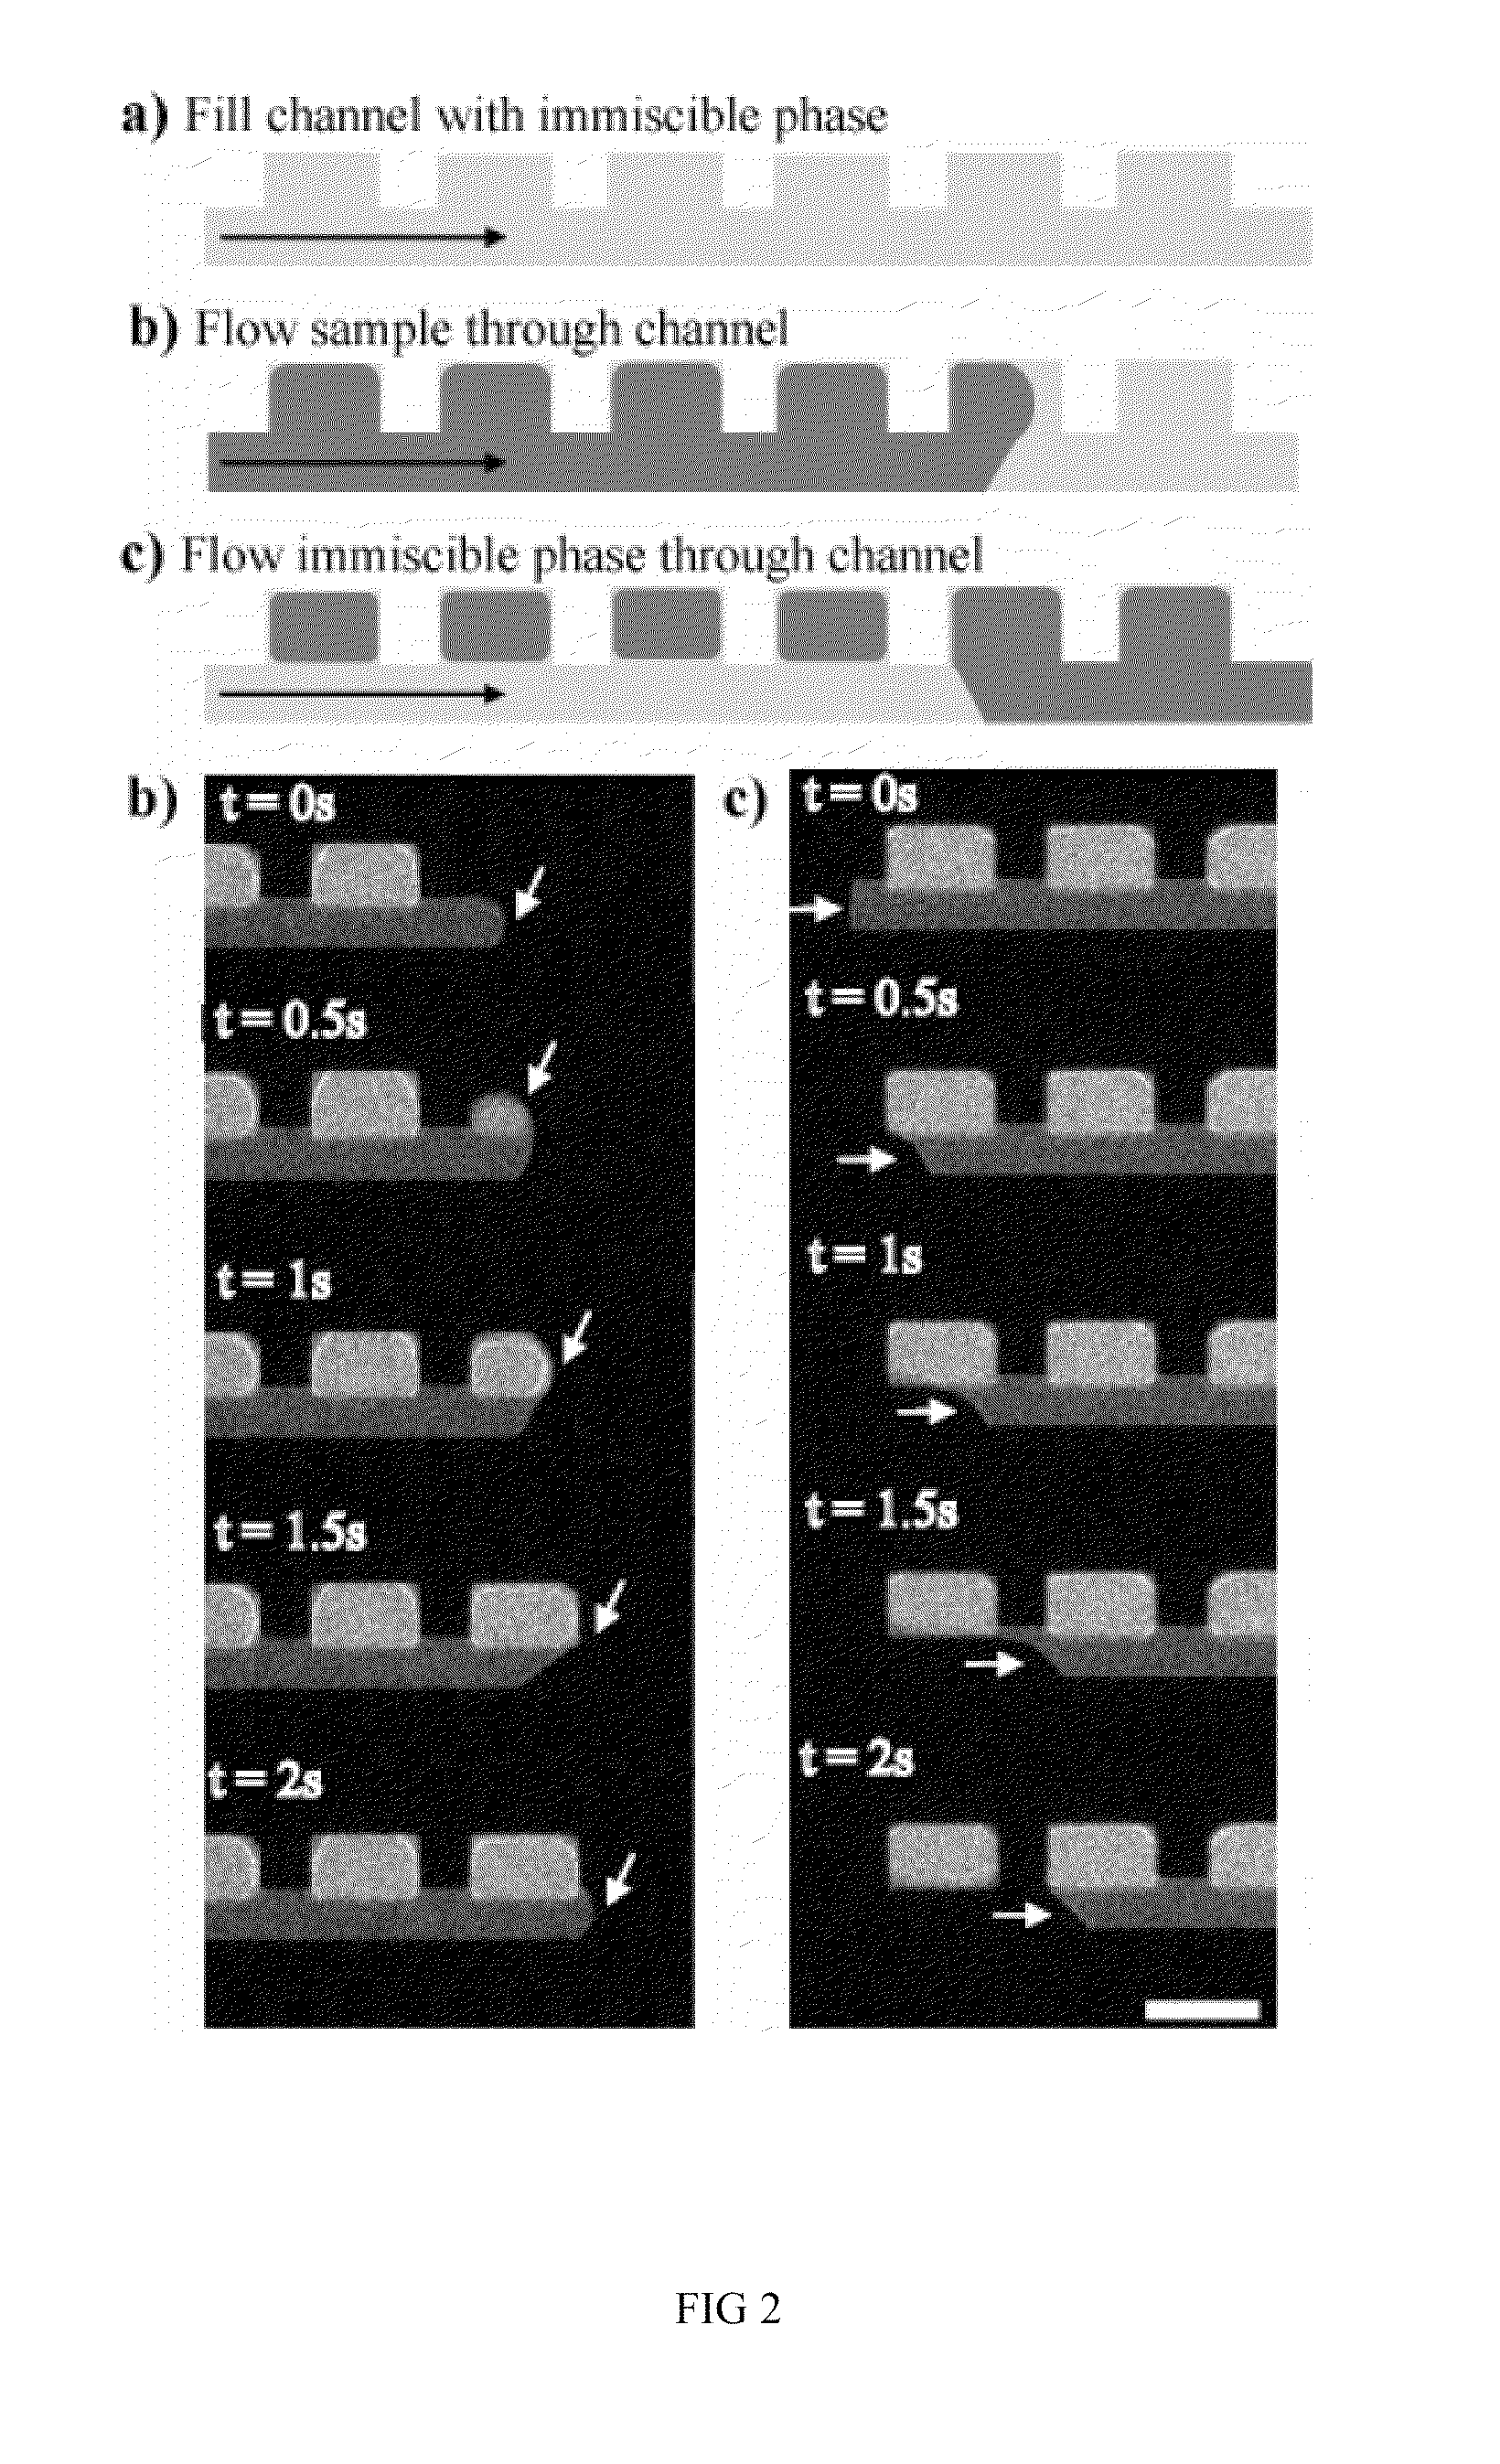 Method and apparatus for the discretization and manipulation of sample volumes